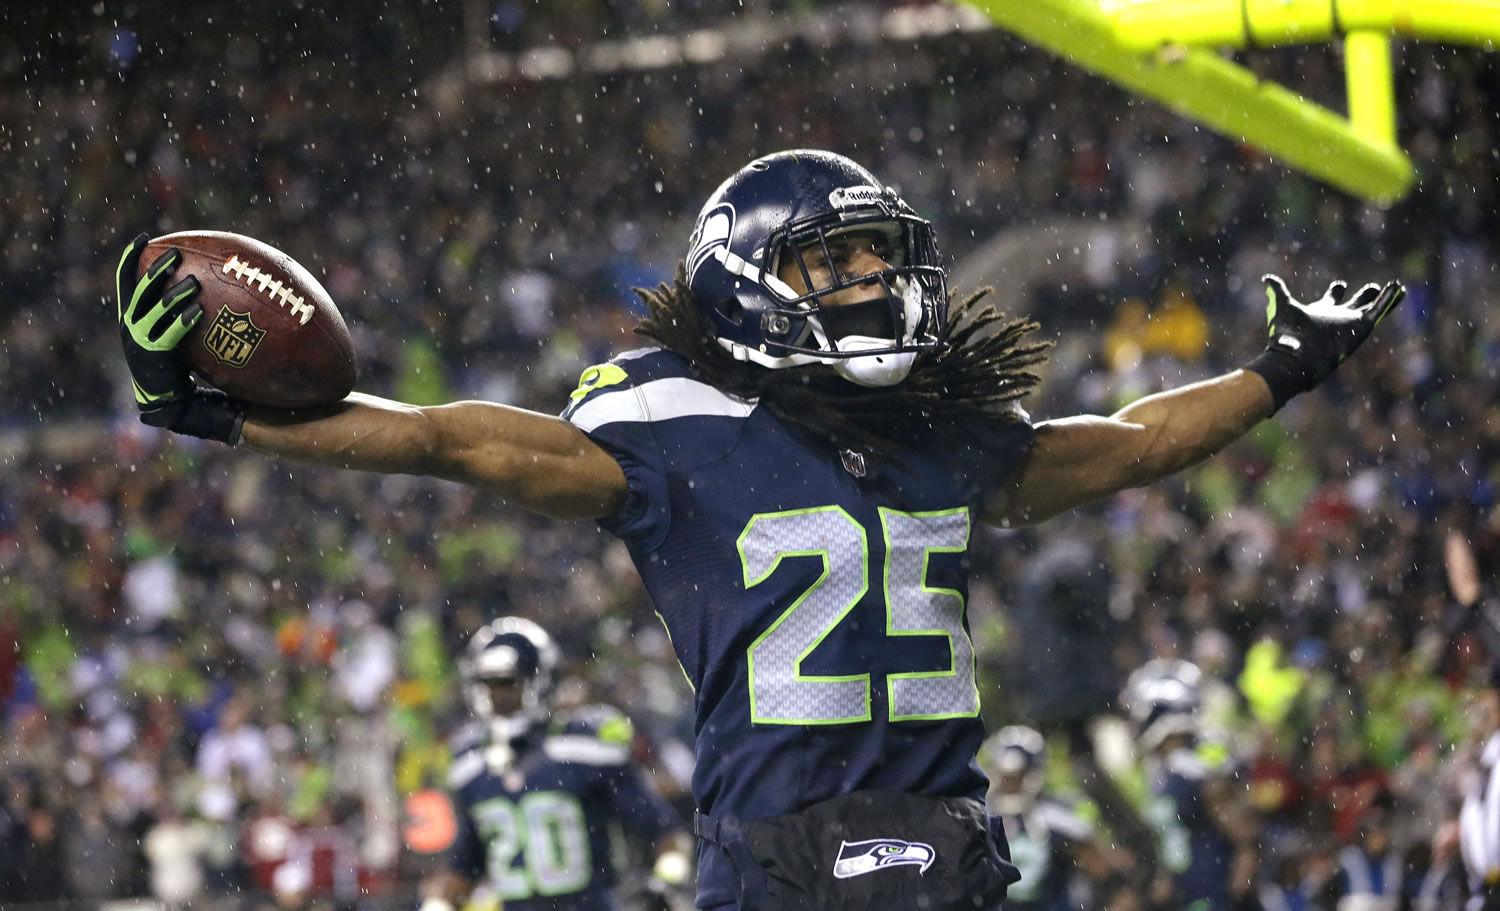 Seattle Seahawks' Richard Sherman motions to fans after an interception in the end zone against the San Francisco 49ers in the second half Sunday.